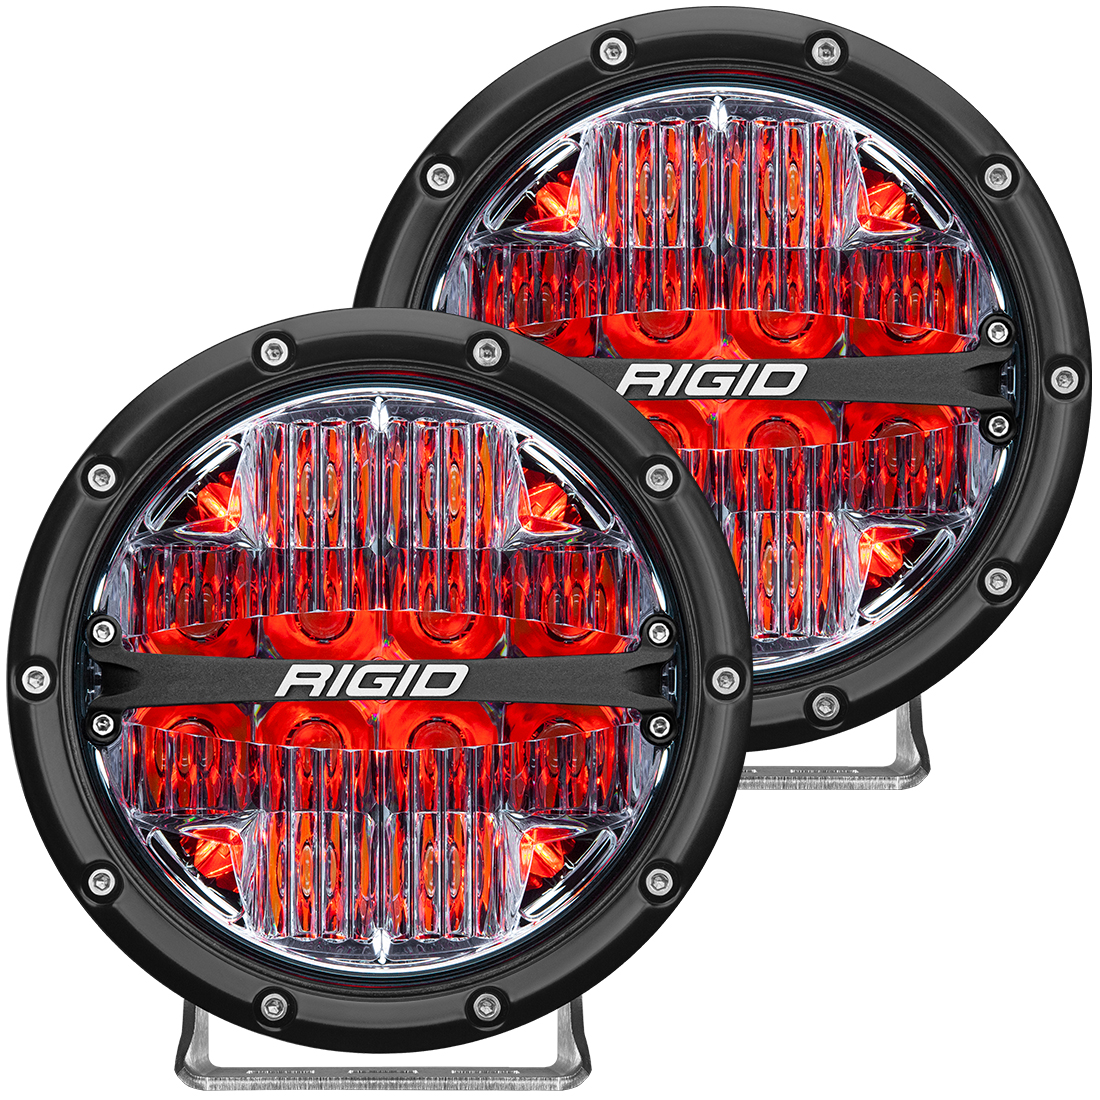 Show details for RIGID Industries 36205 Rigid 360-Series 6 Inch Off-Road Led Light, Drive Beam, Red Backlight, Pair